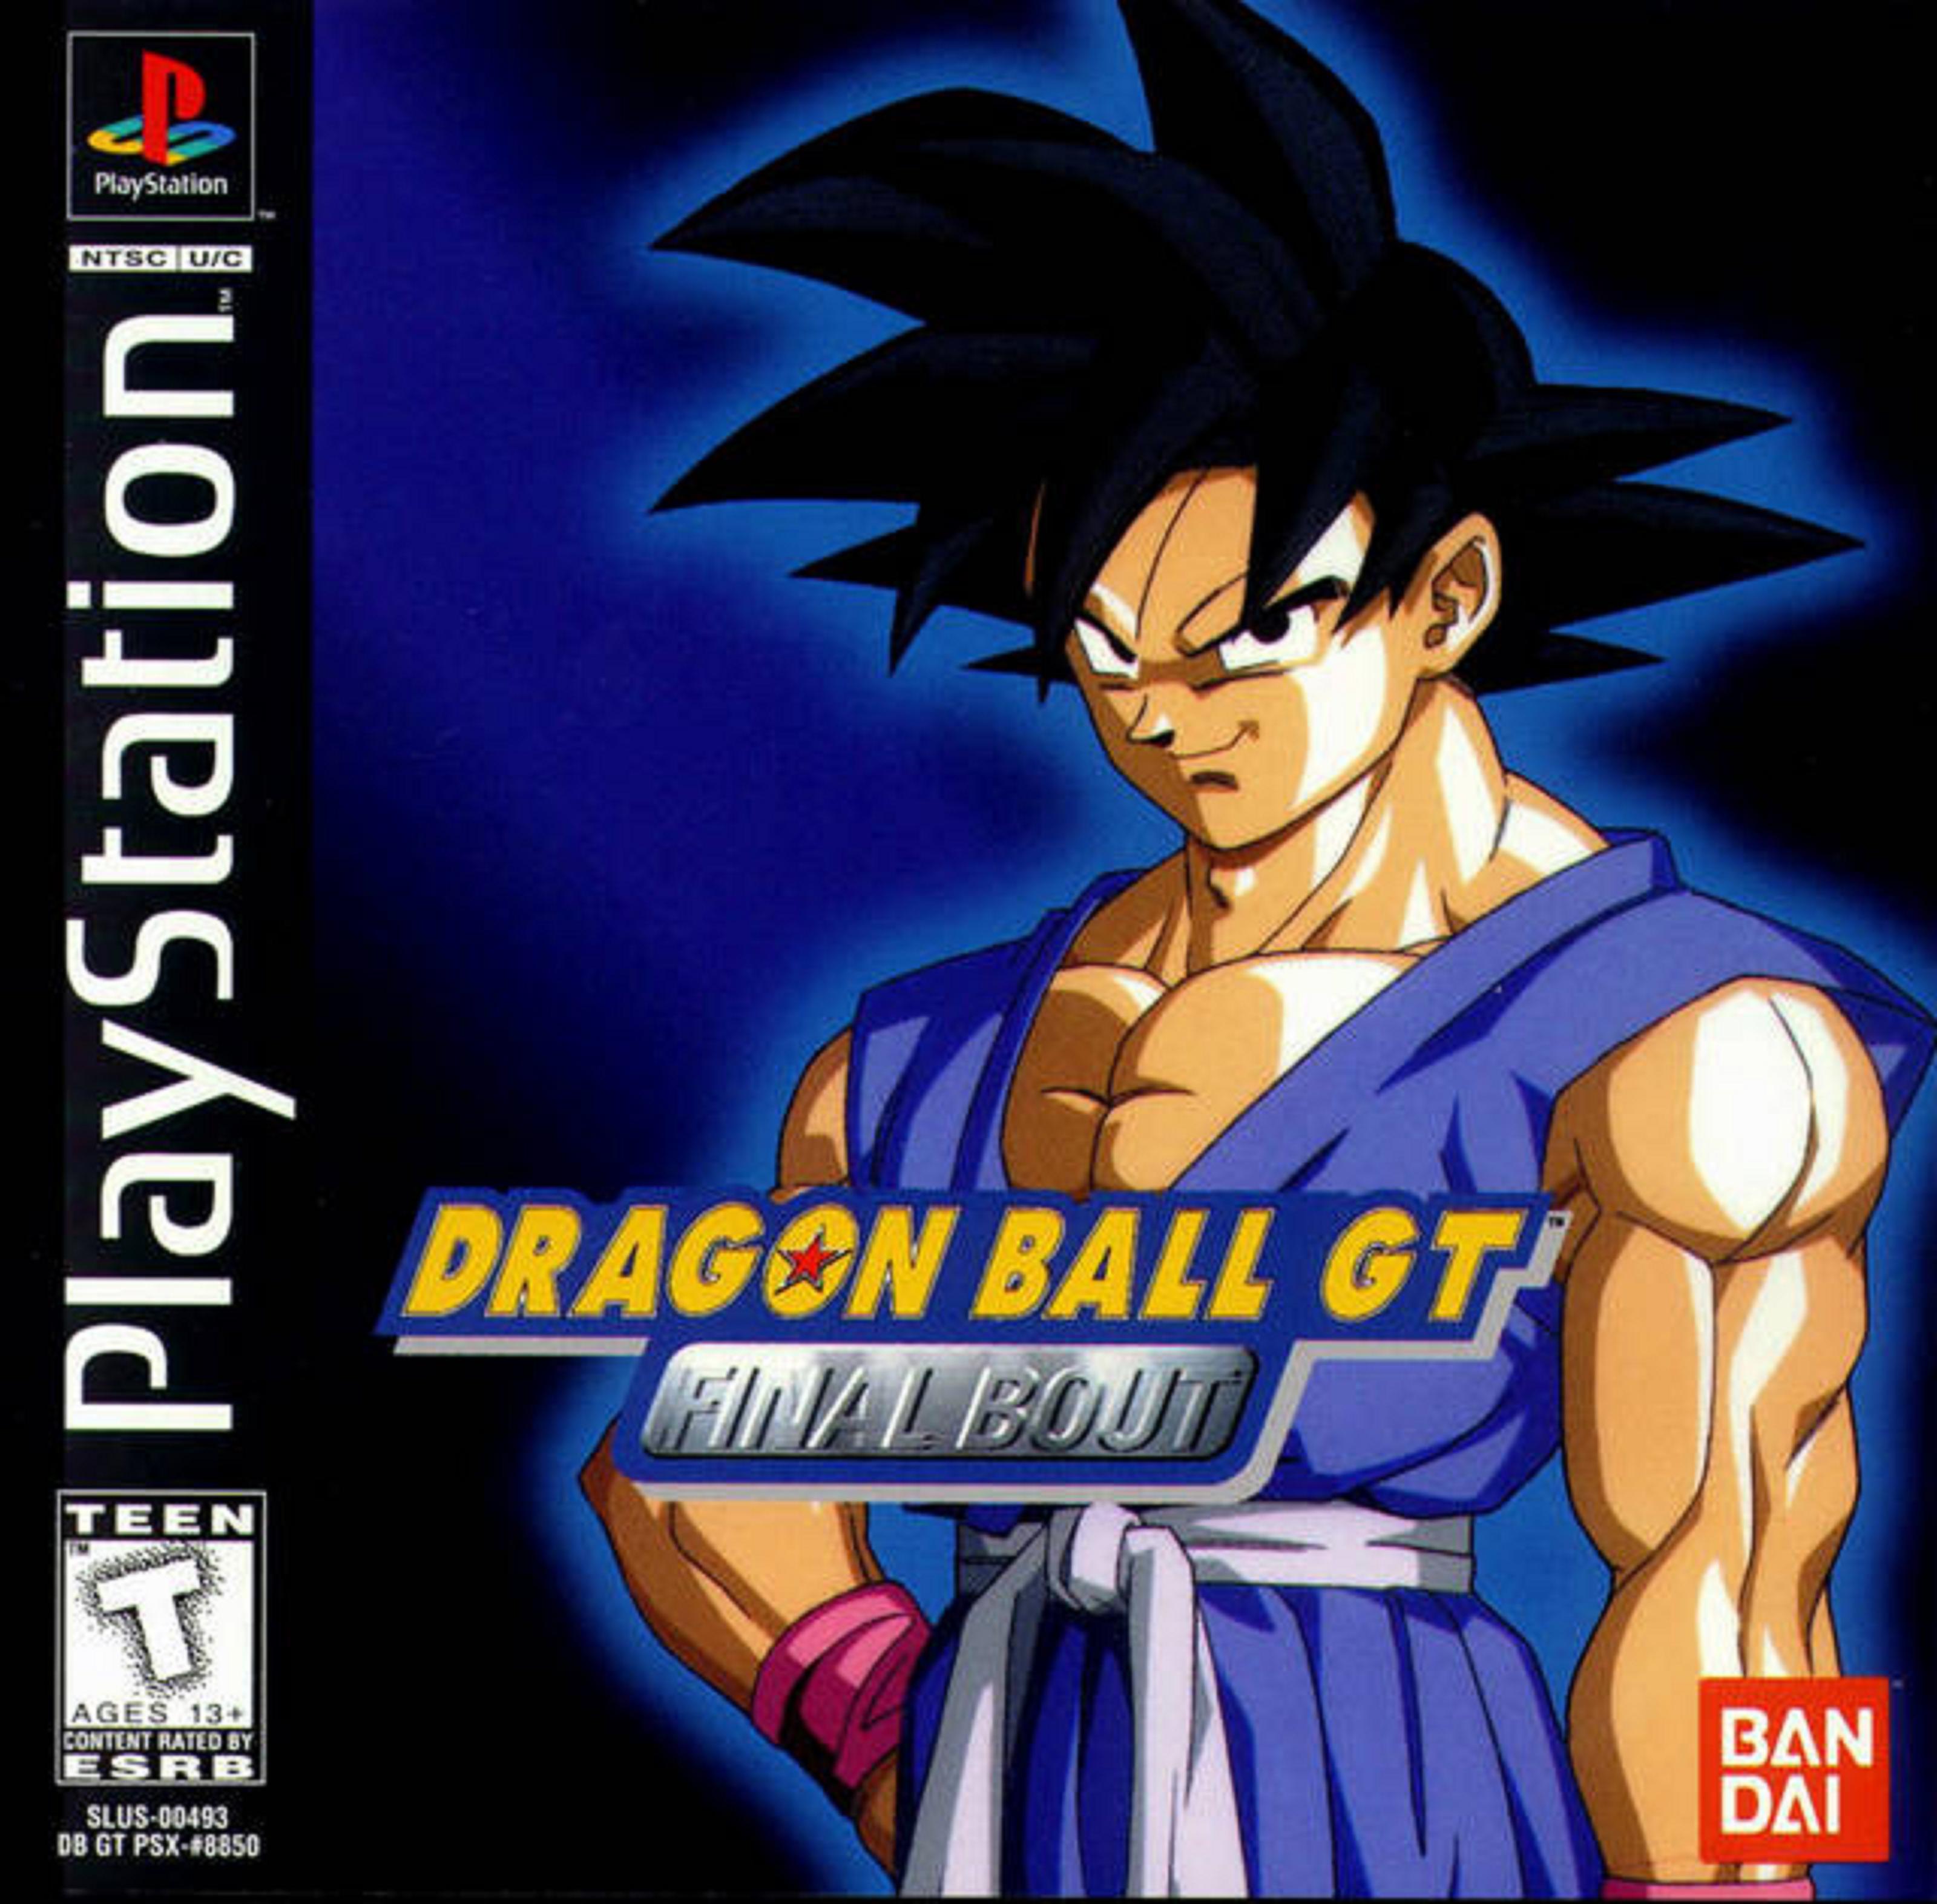 Tricks of Dragon Ball Gt: Final Bout for PSX